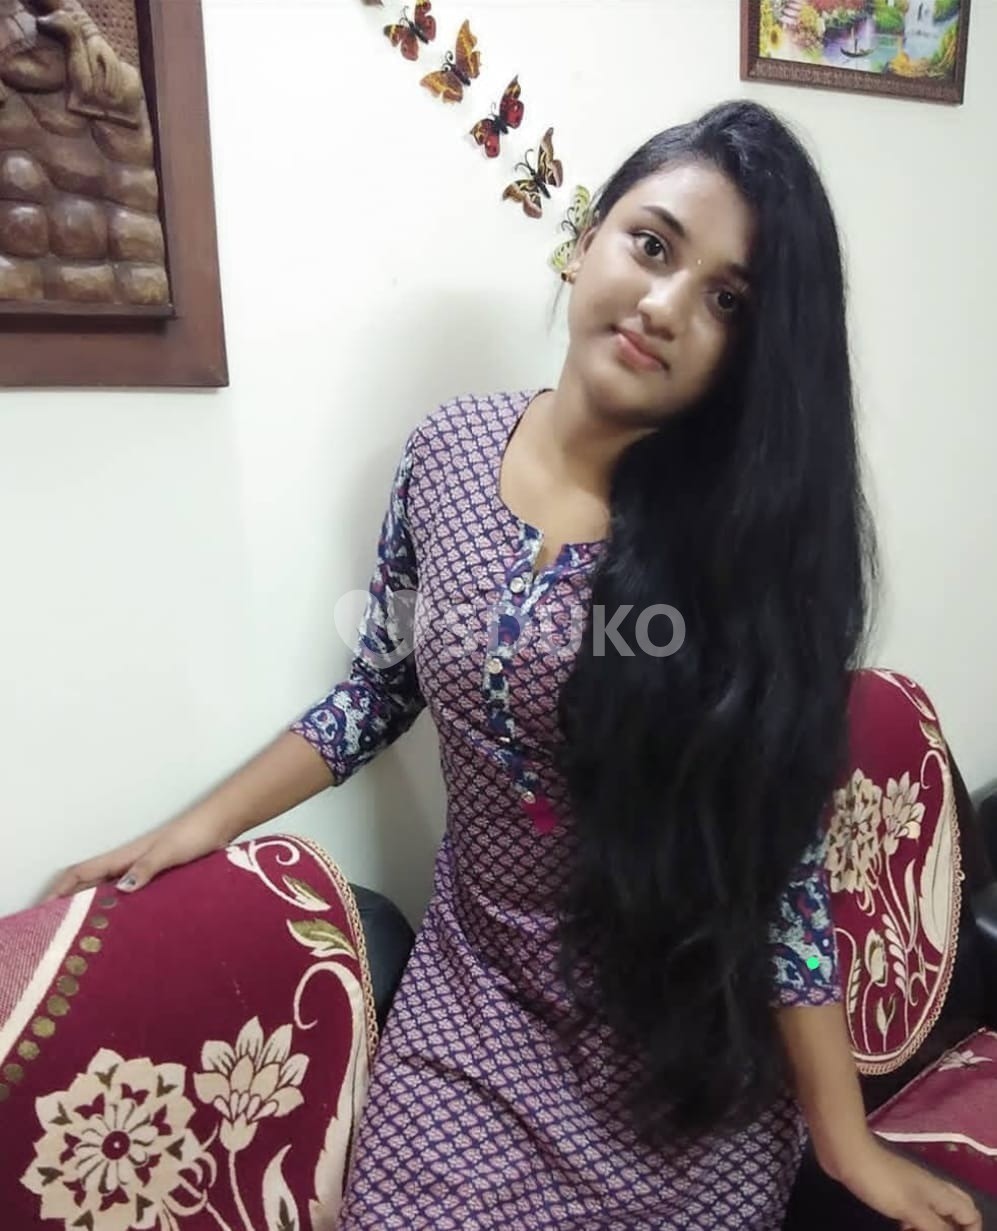 YELAHANKA 💯% FULLY SATISFACTION AND DOORSTEP INCALL OUTCALL SERVICE. AVAILABLE SAFE AND SECURE AVAILABLE